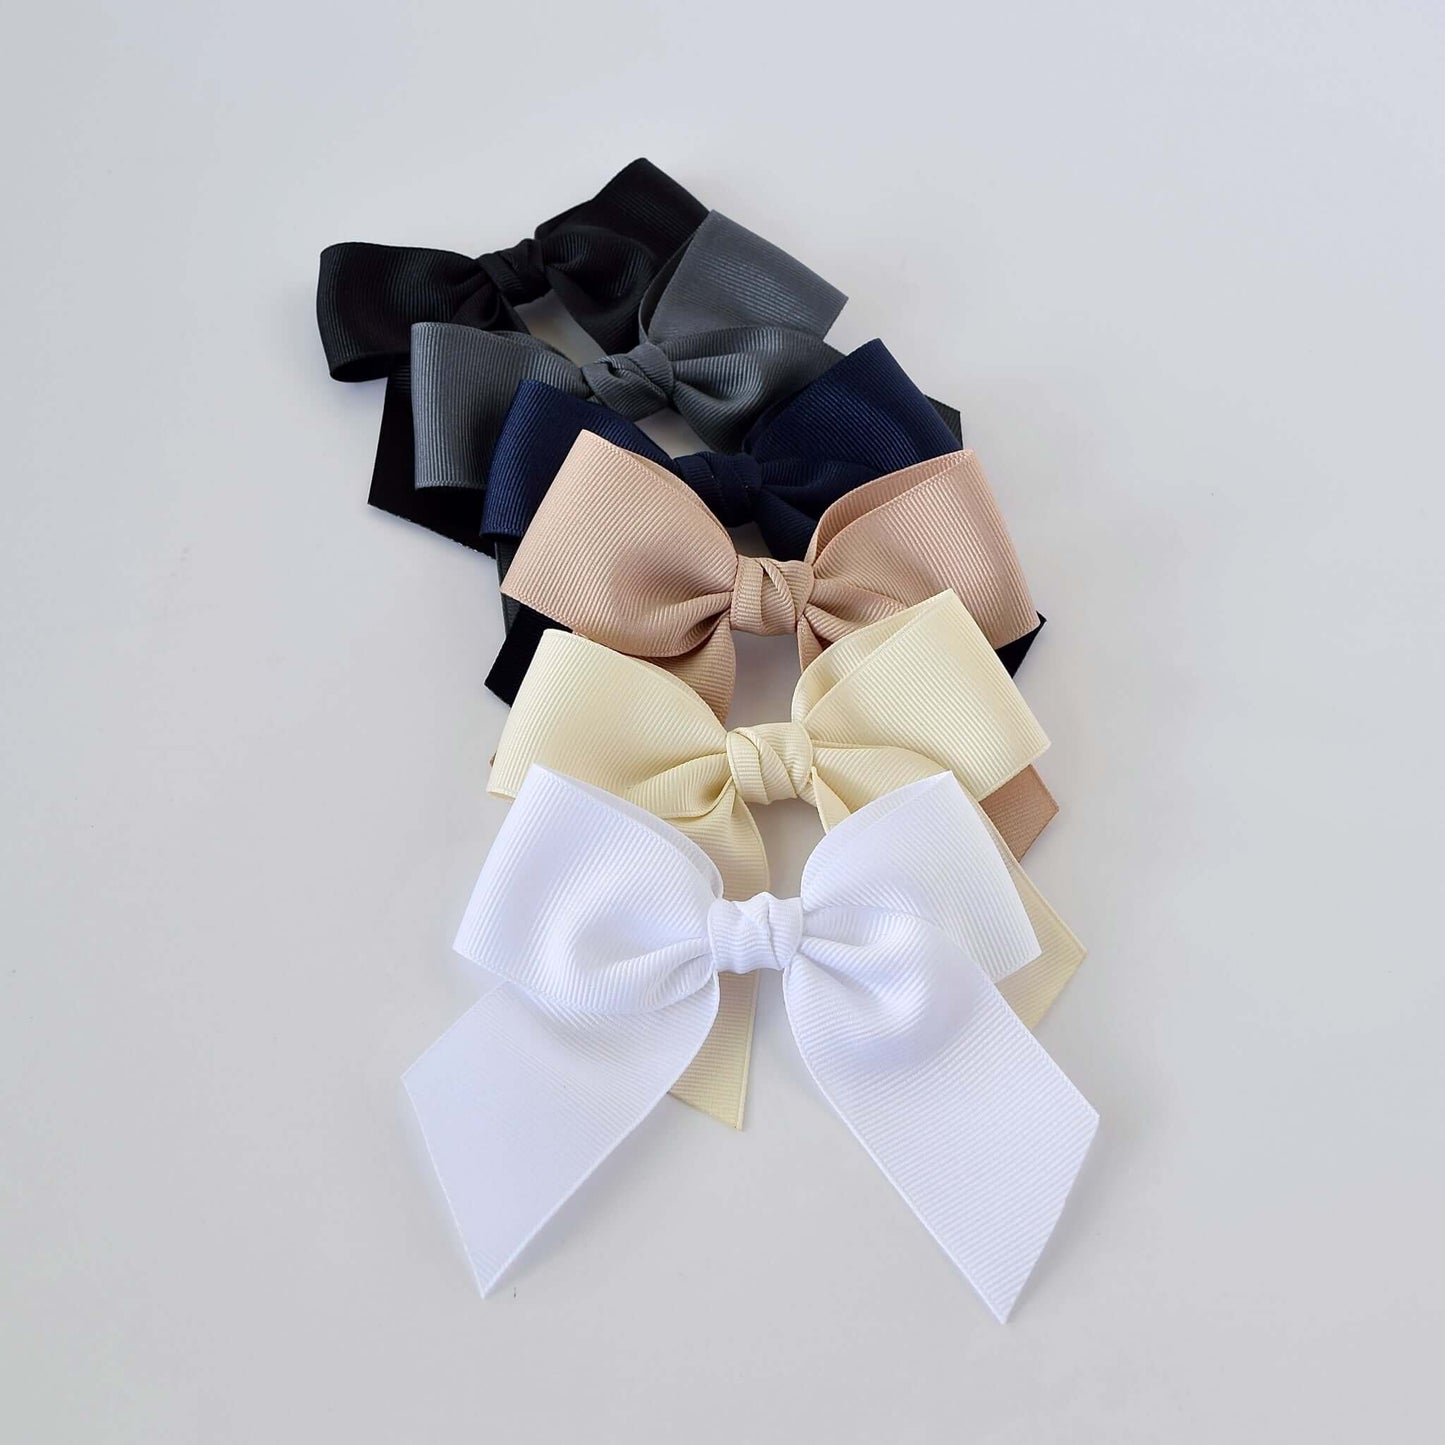 Neutral grosgrain sailor bows for toddlers and girls in black, navy, gray, taupe, ivory, and white arranged in a row.